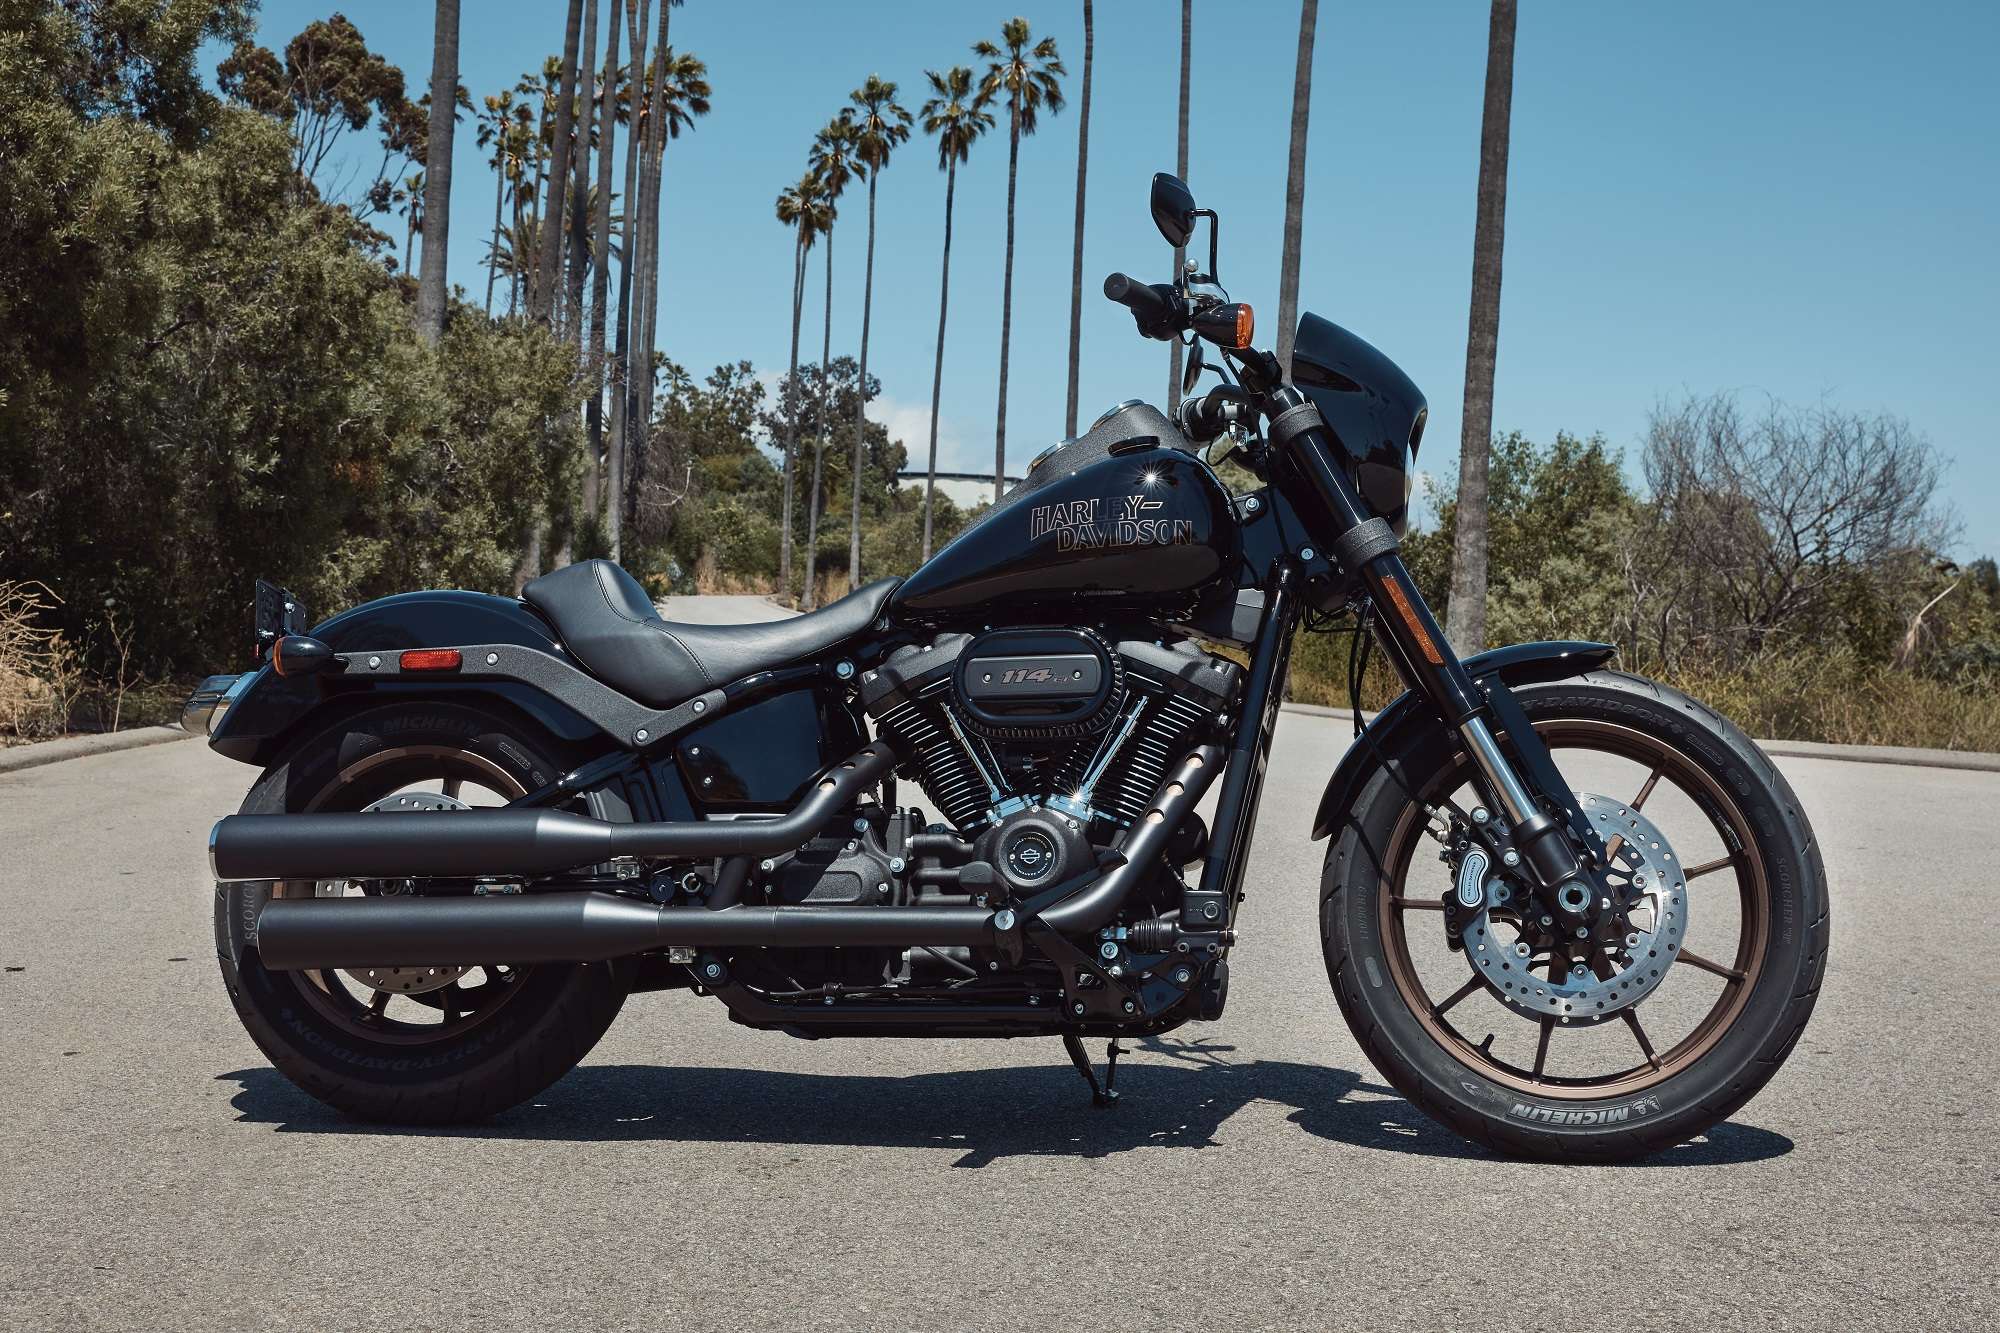 Harley 2020 Low Rider S Harley Davidson Launches 2020 Low Rider S In India Priced At Rs 14 69 Lakh Auto News Et Auto